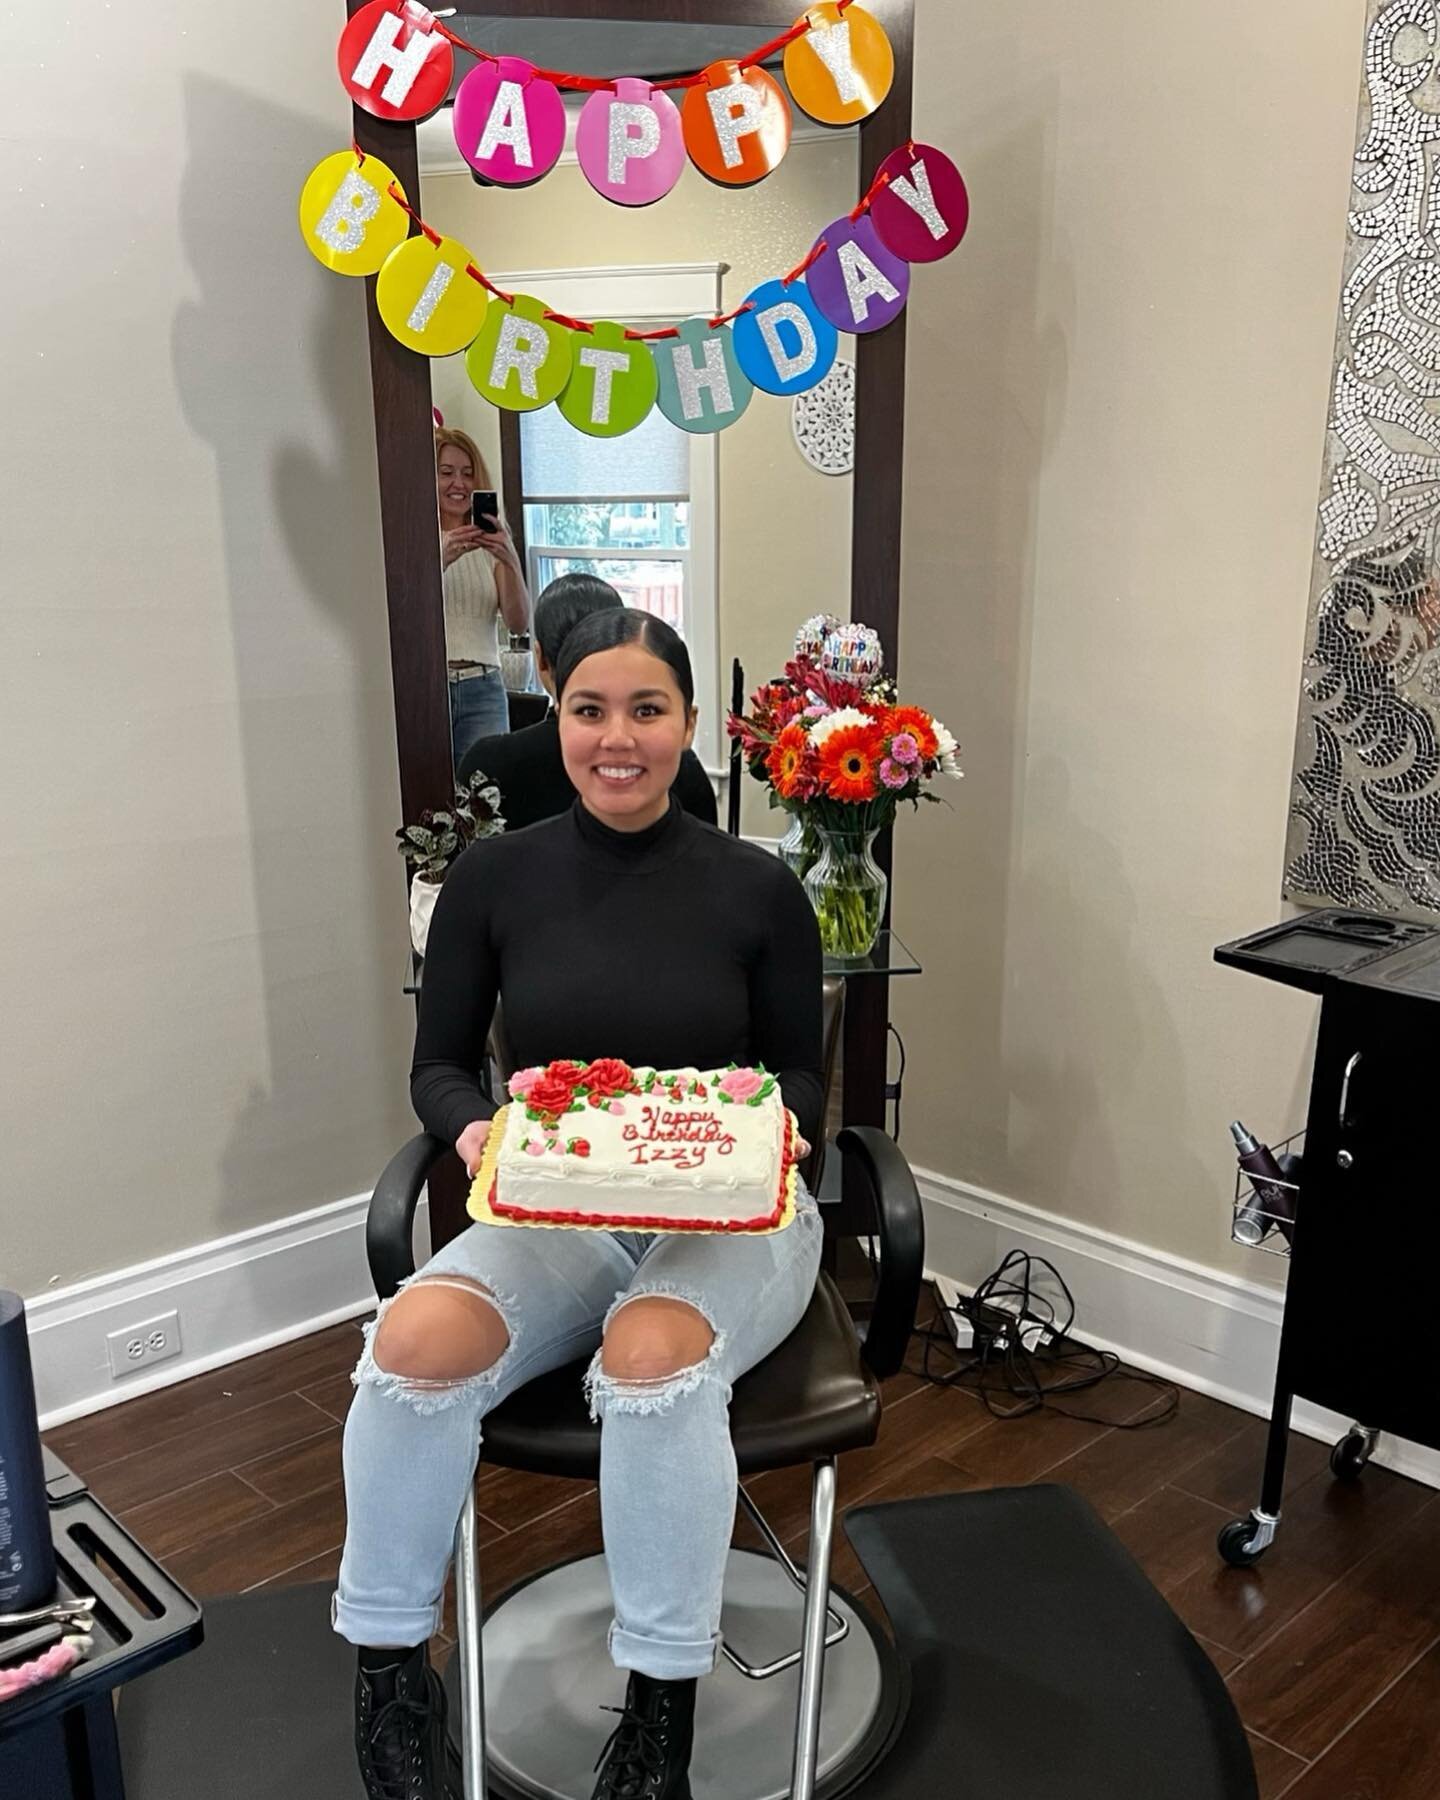 Happy Birthday Izzy! Wishing you a year filled with blessings and happiness. We love you, baby girl💕 #birthdaygirl #celebrate #eriepasalon #eriepalashes #eriepahairstylist #salonlife #salonfamily 
@glamourbyizzy @isabelleerose_